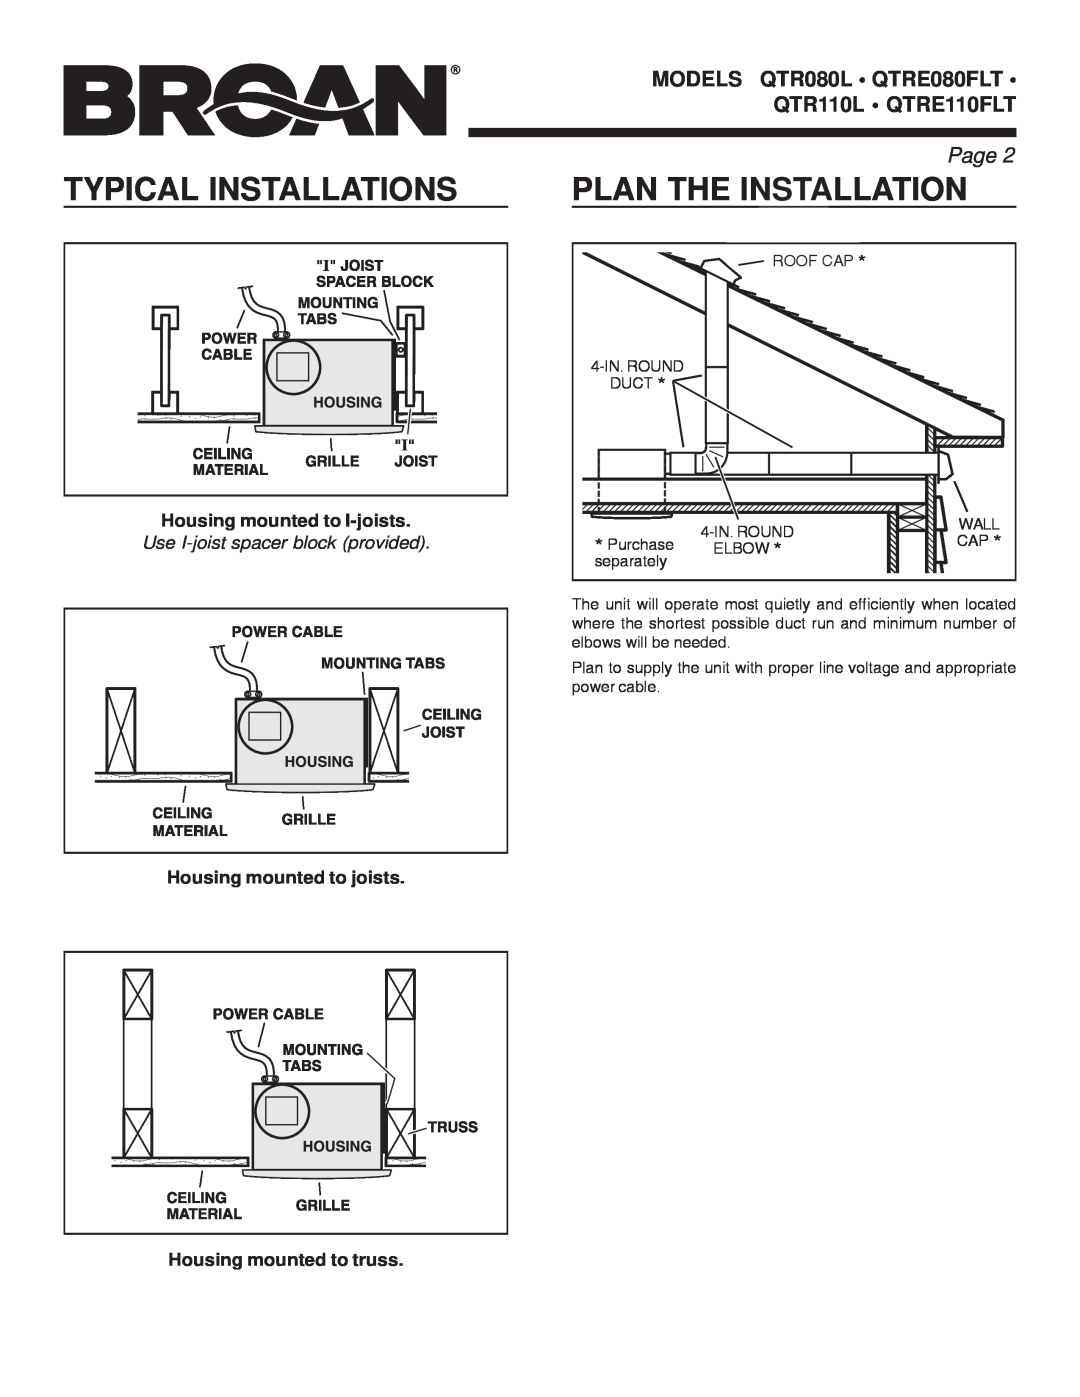 Broan QTR110L Typical Installations, Plan The Installation, Page, Housing mounted to I-joists, Housing mounted to joists 